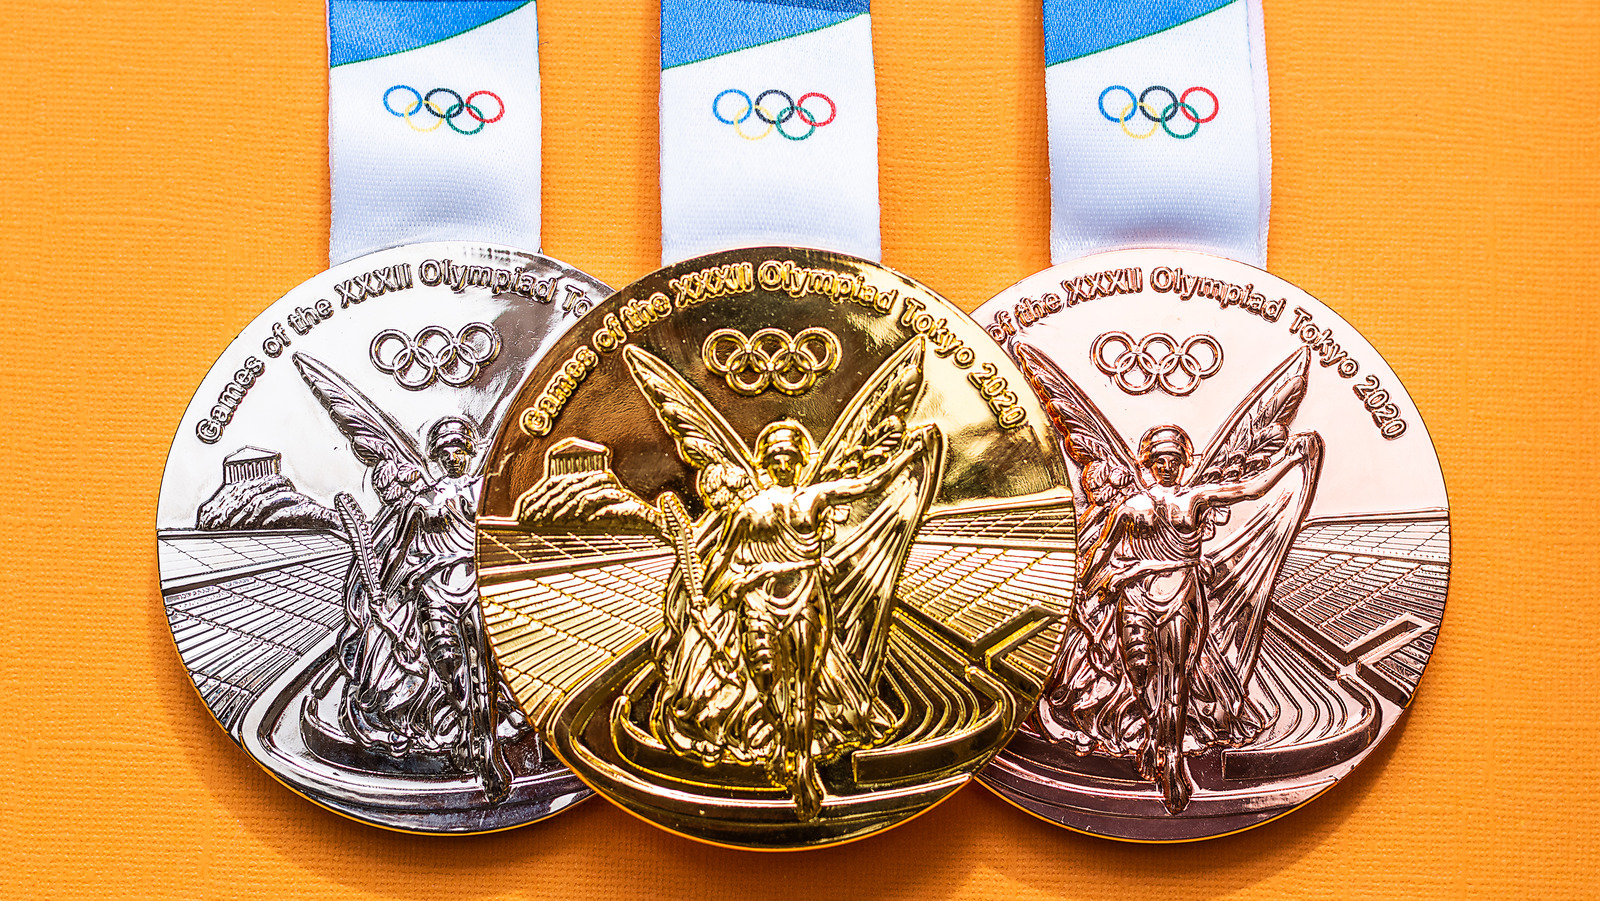 Olympic Medals 2020, Tokyo Olympics Unveil Gold Silver Bronze Medals